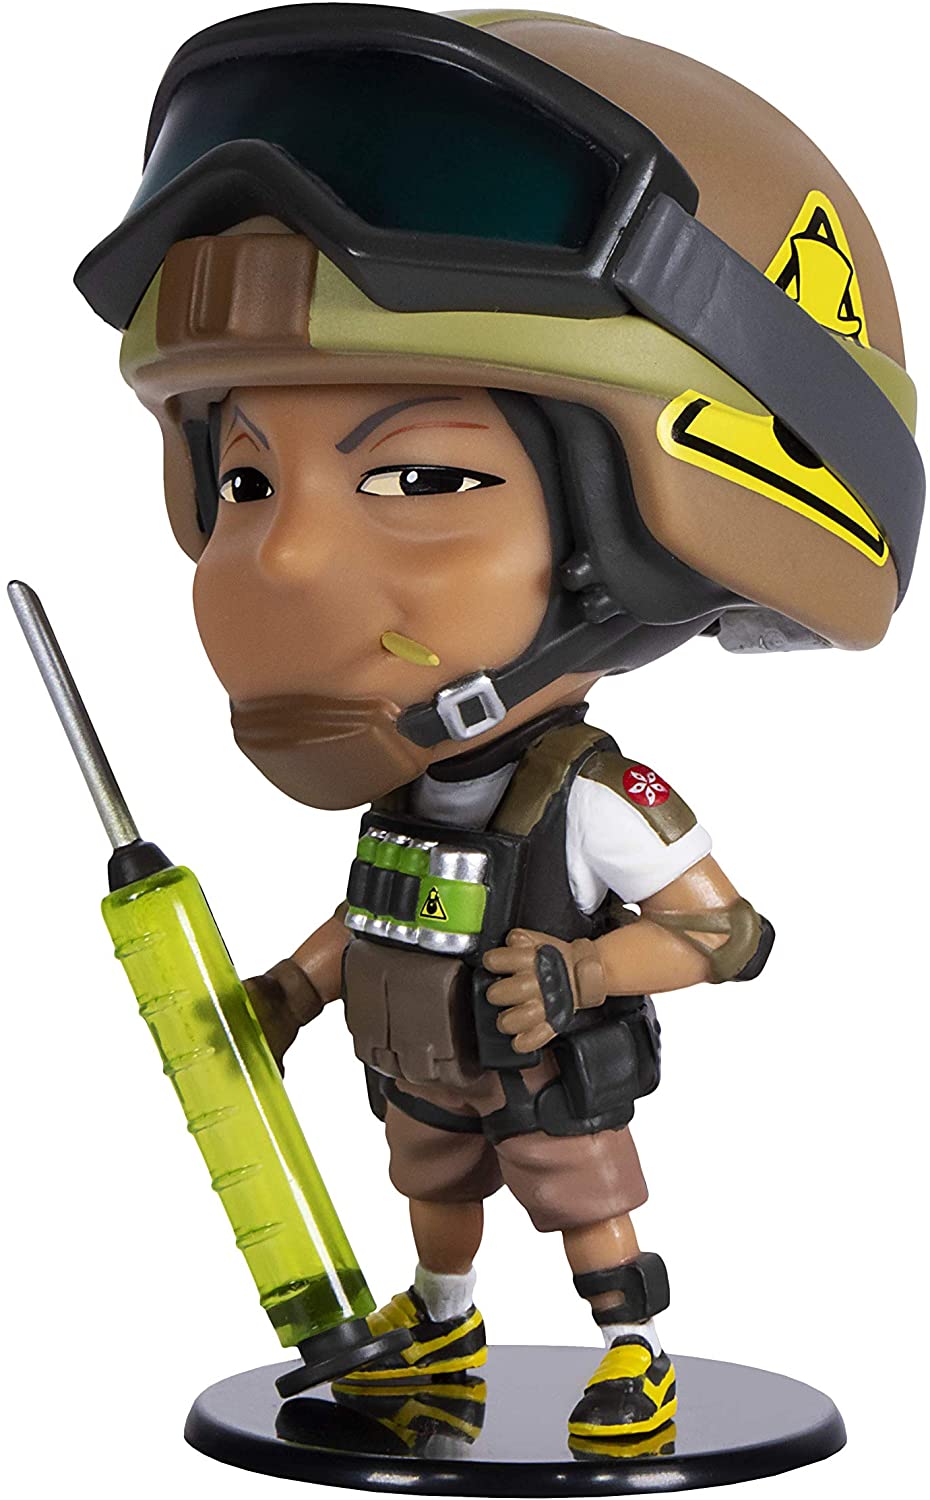 Six Collection Series 6 Lesion Chibi Figurine